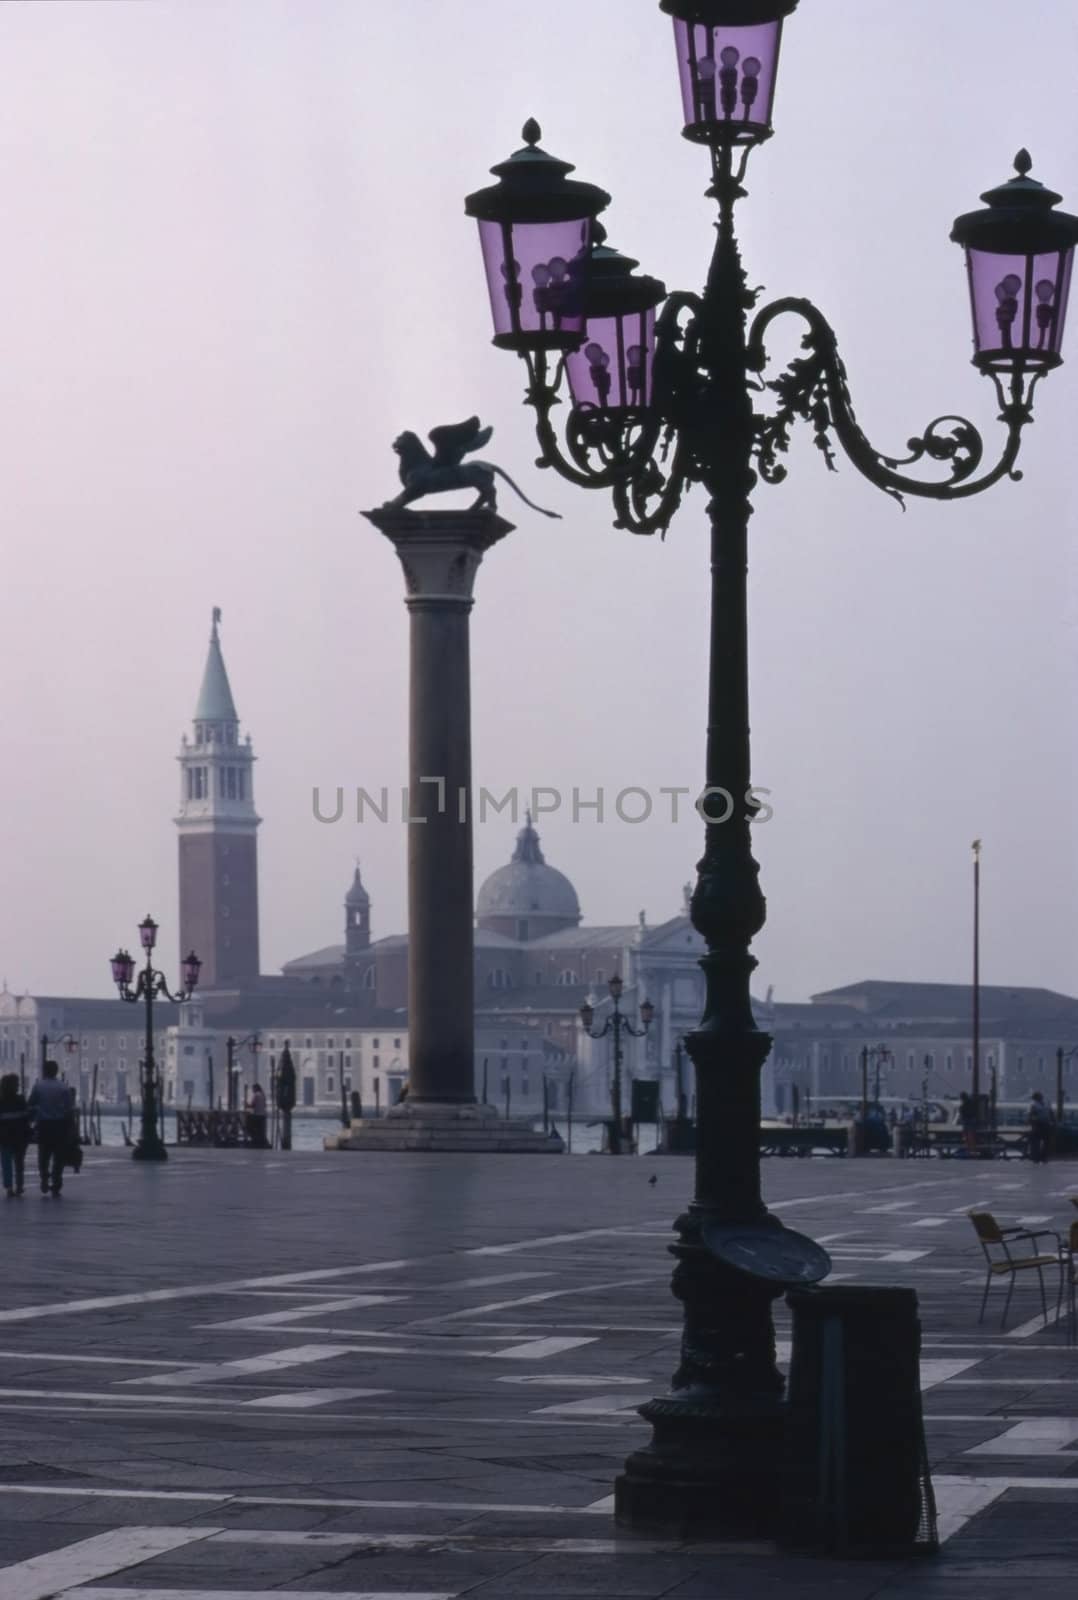 Early morning in Venice